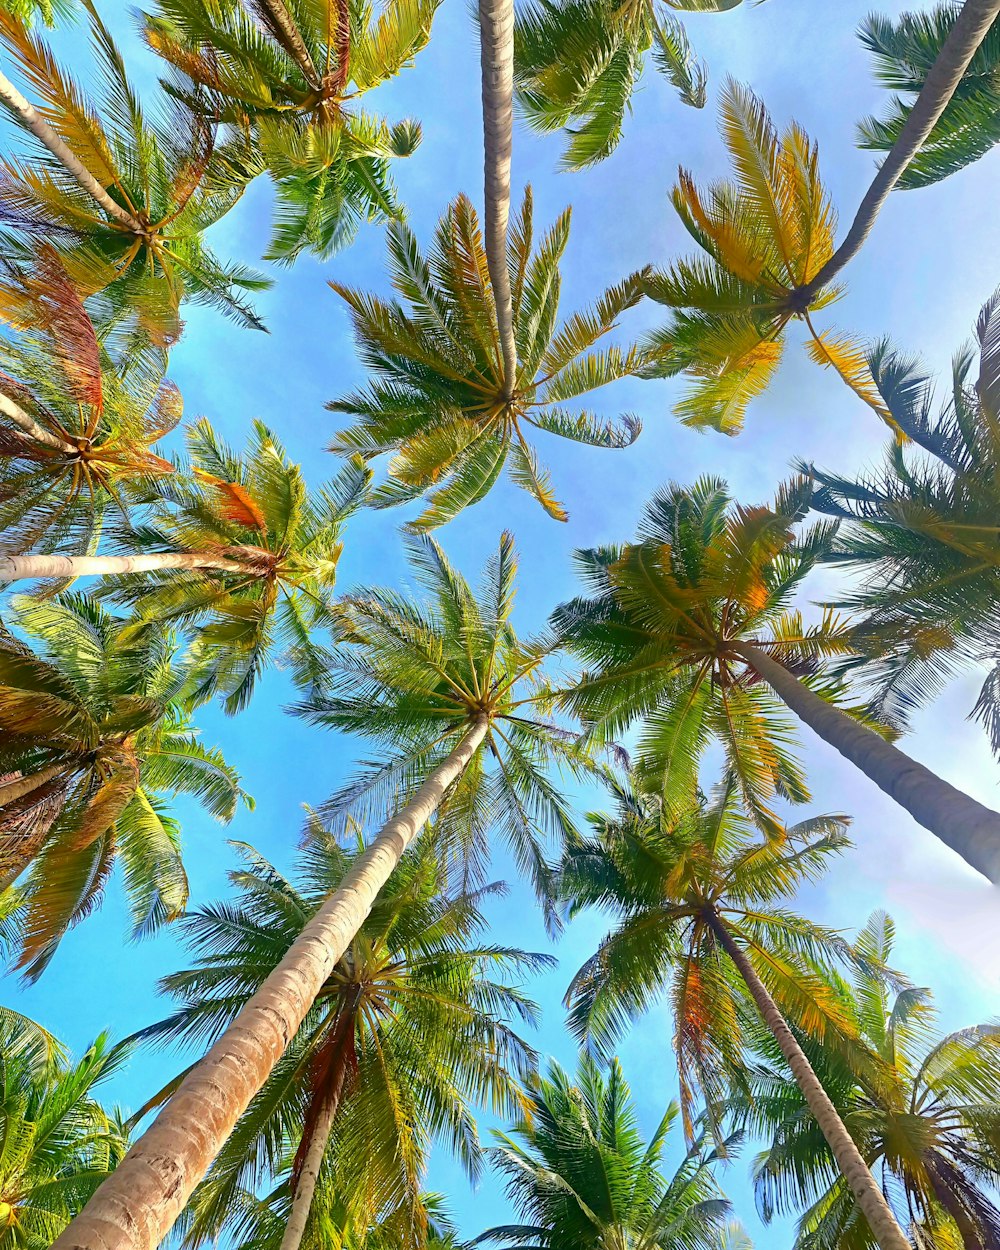 low angle of coconut trees under blue sky